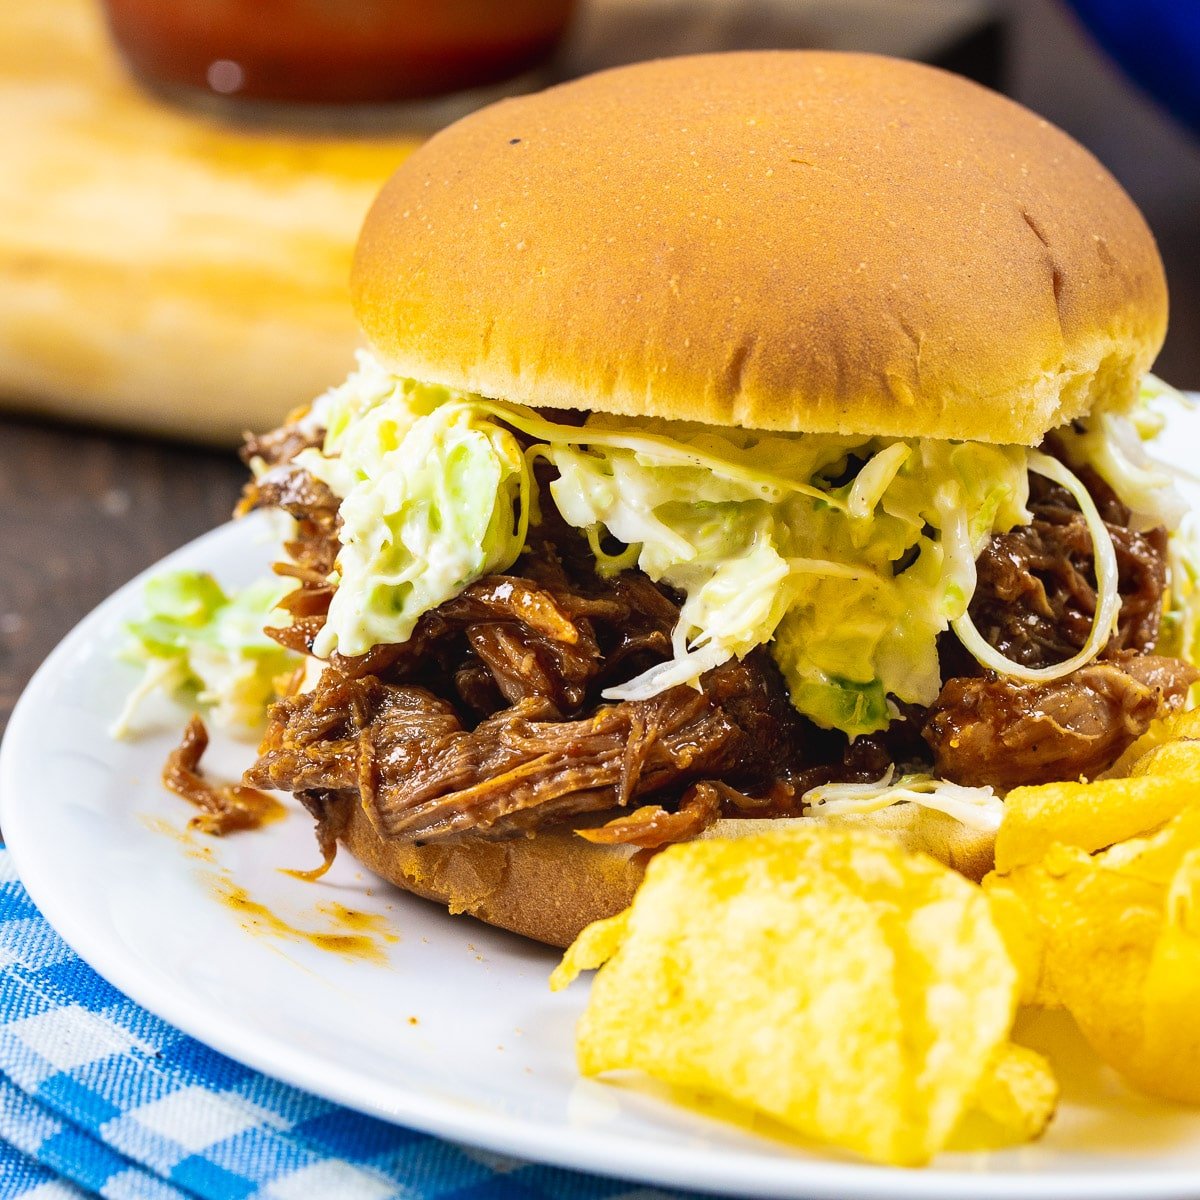 Pulled Pork Sandwich with coleslaw.